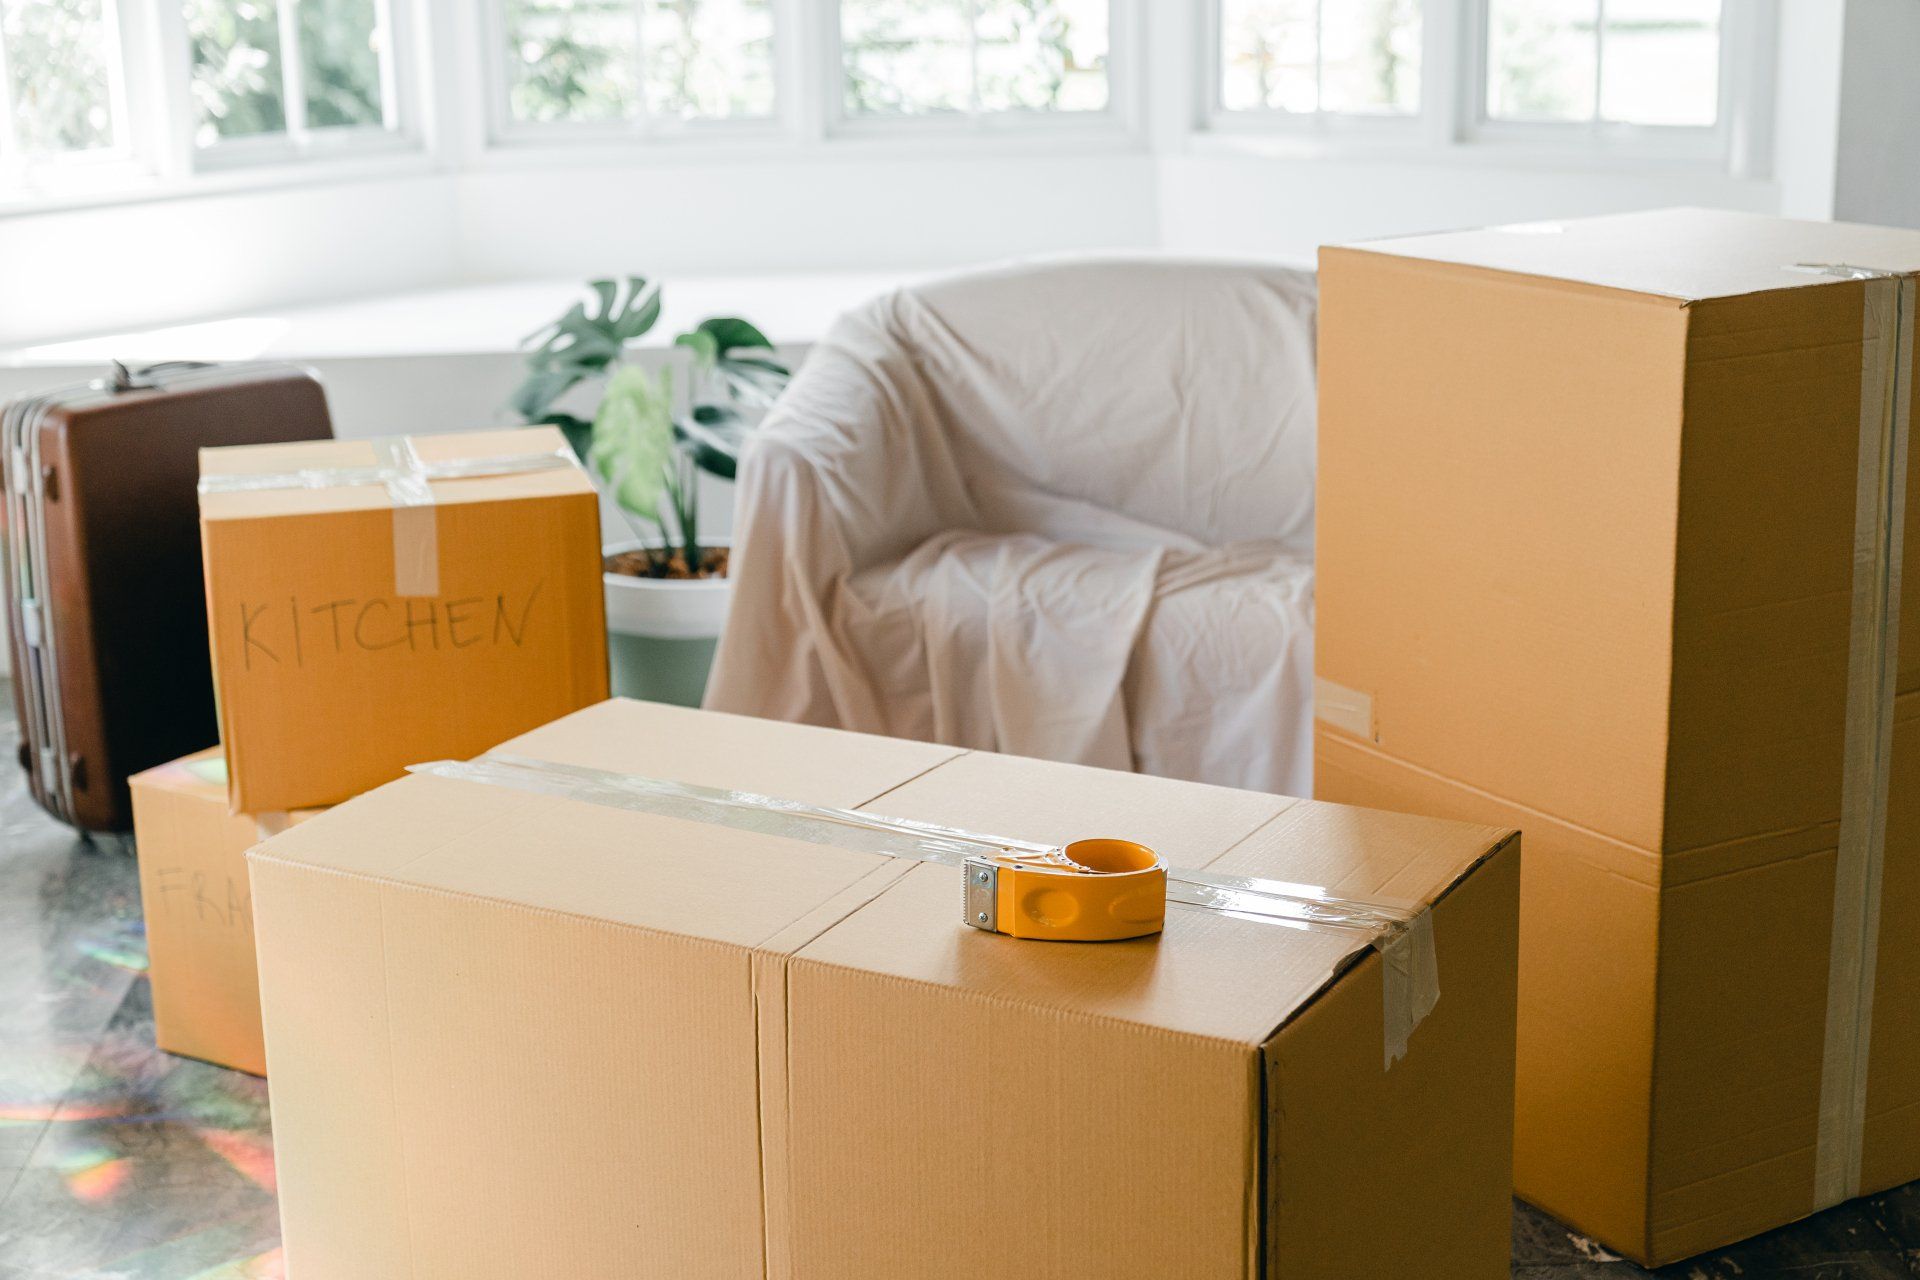 Tidying up a room filled with boxes, efficiently organizing and cleaning the space during a moving in and out transition.